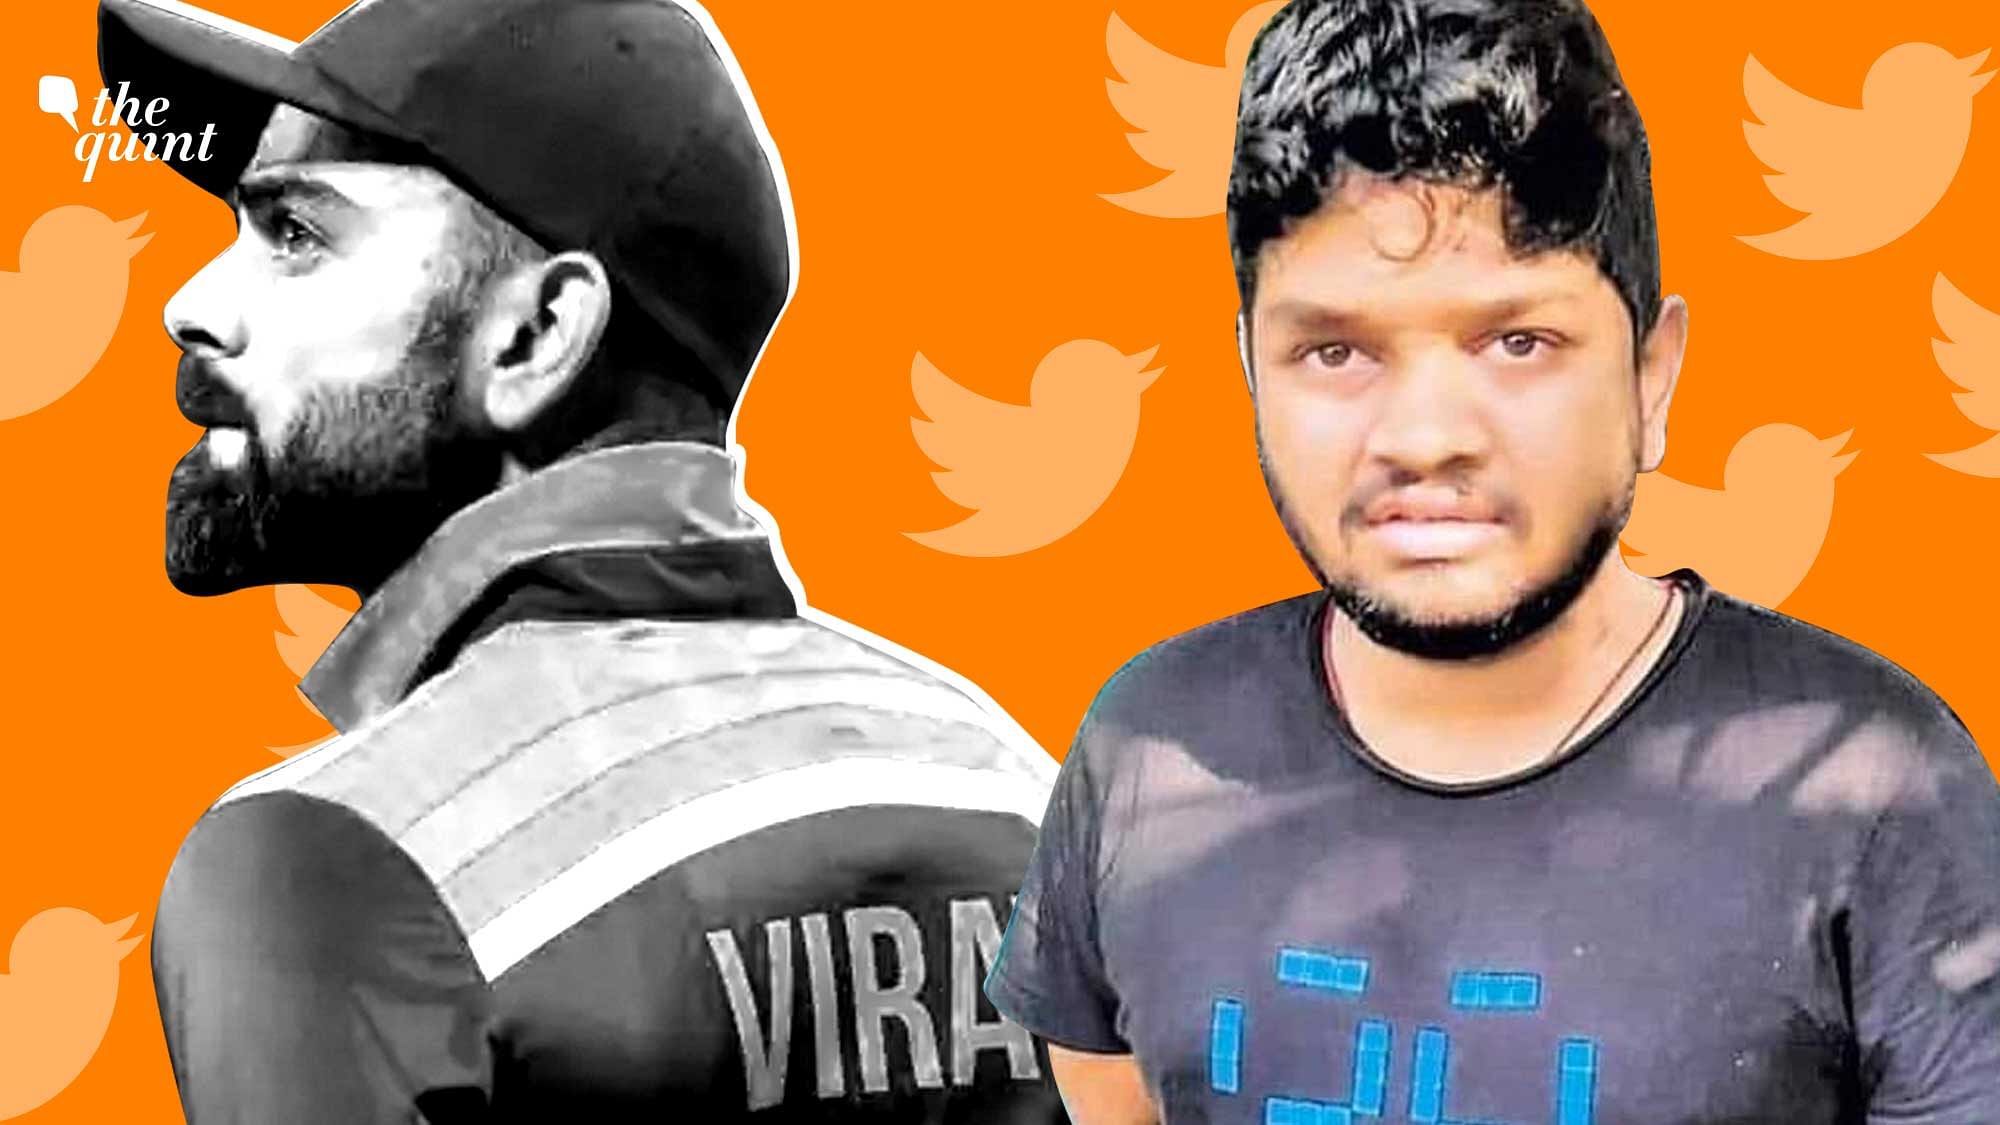 <div class="paragraphs"><p>Ramnagesh Akubathini from Hyderabad was arrested because he tweeted a rape threat targeting Virat Kohli's nine-month-old baby. Image used for representational purposes.&nbsp;</p></div>